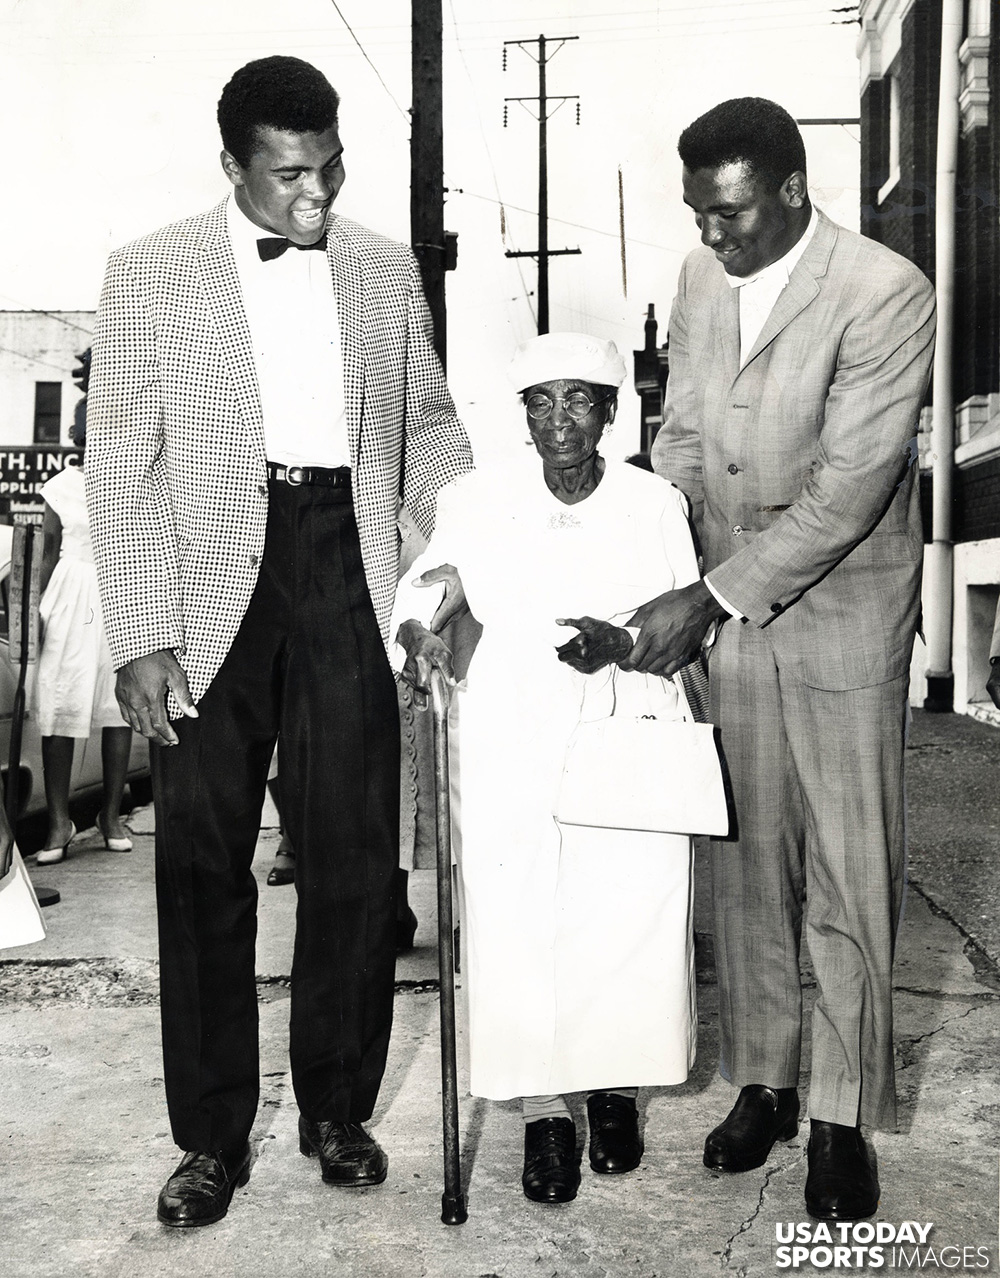 Cassius Clay, later known as Muhammad Ali (left), and his brother Rudy Clay, later known as Rahman Ali (right), walk with their great-grandmother Betsy Jane Greathouse (center) who was 99 when this picture was taken in 1963 in Louisville.  //  Credit: Charles Fentress Jr., The Courier-Journal, USA TODAY Sports